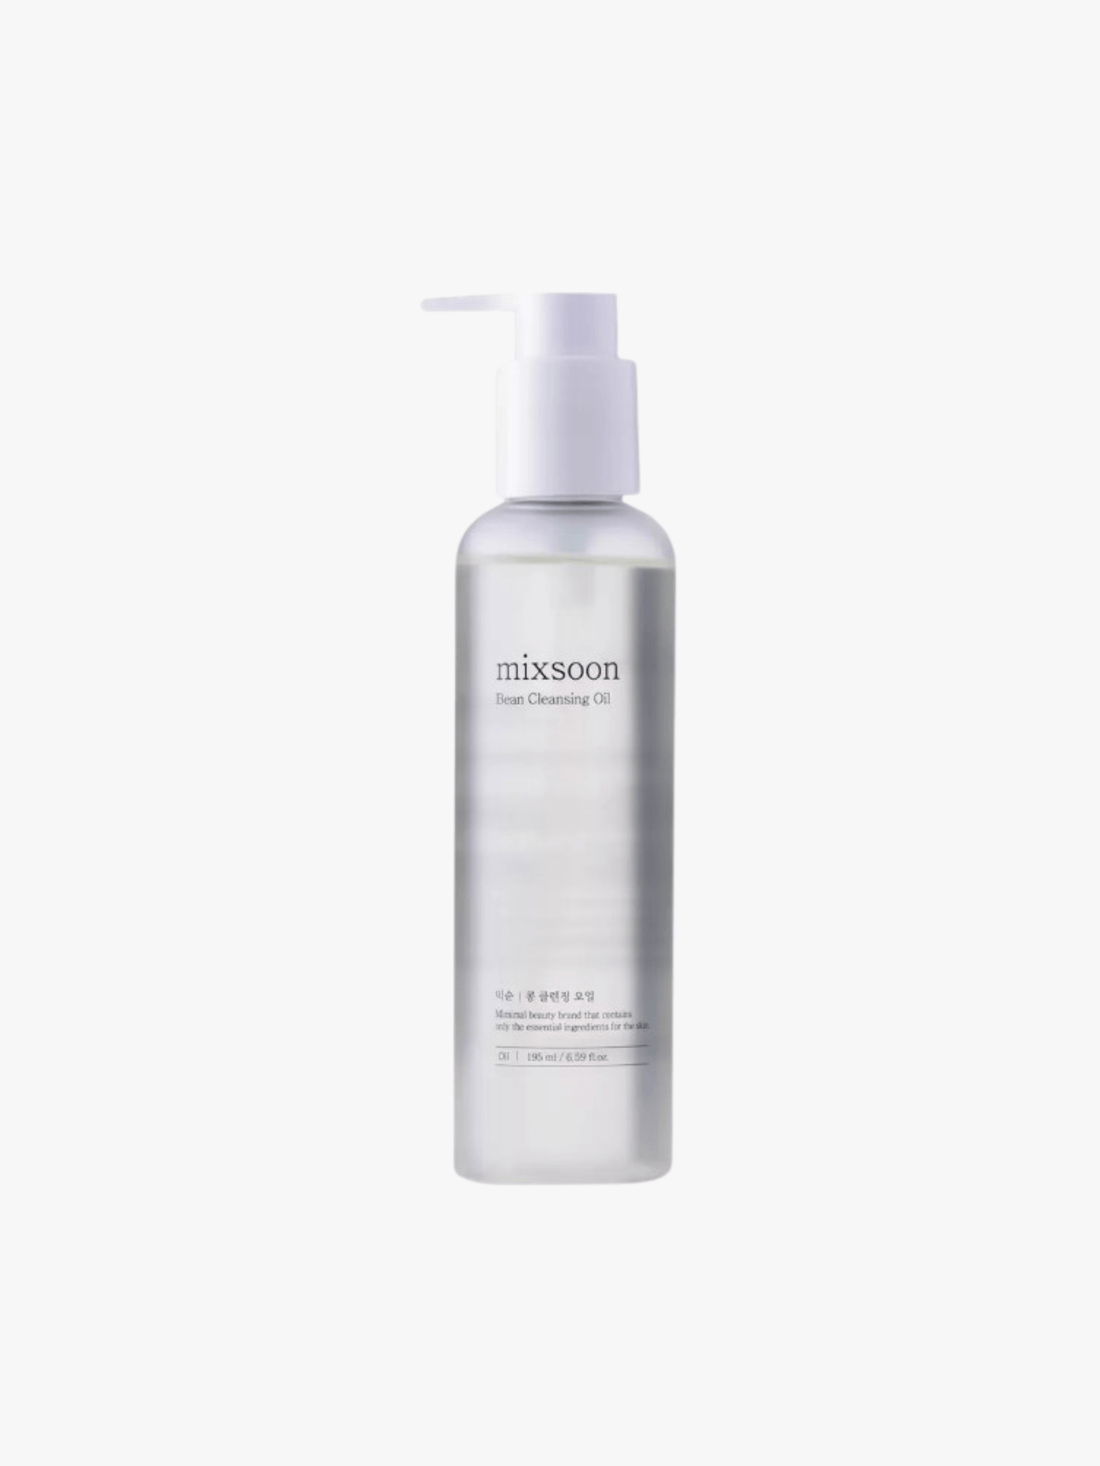 Mixsoon - Huile nettoyante - Bean Cleansing Oil